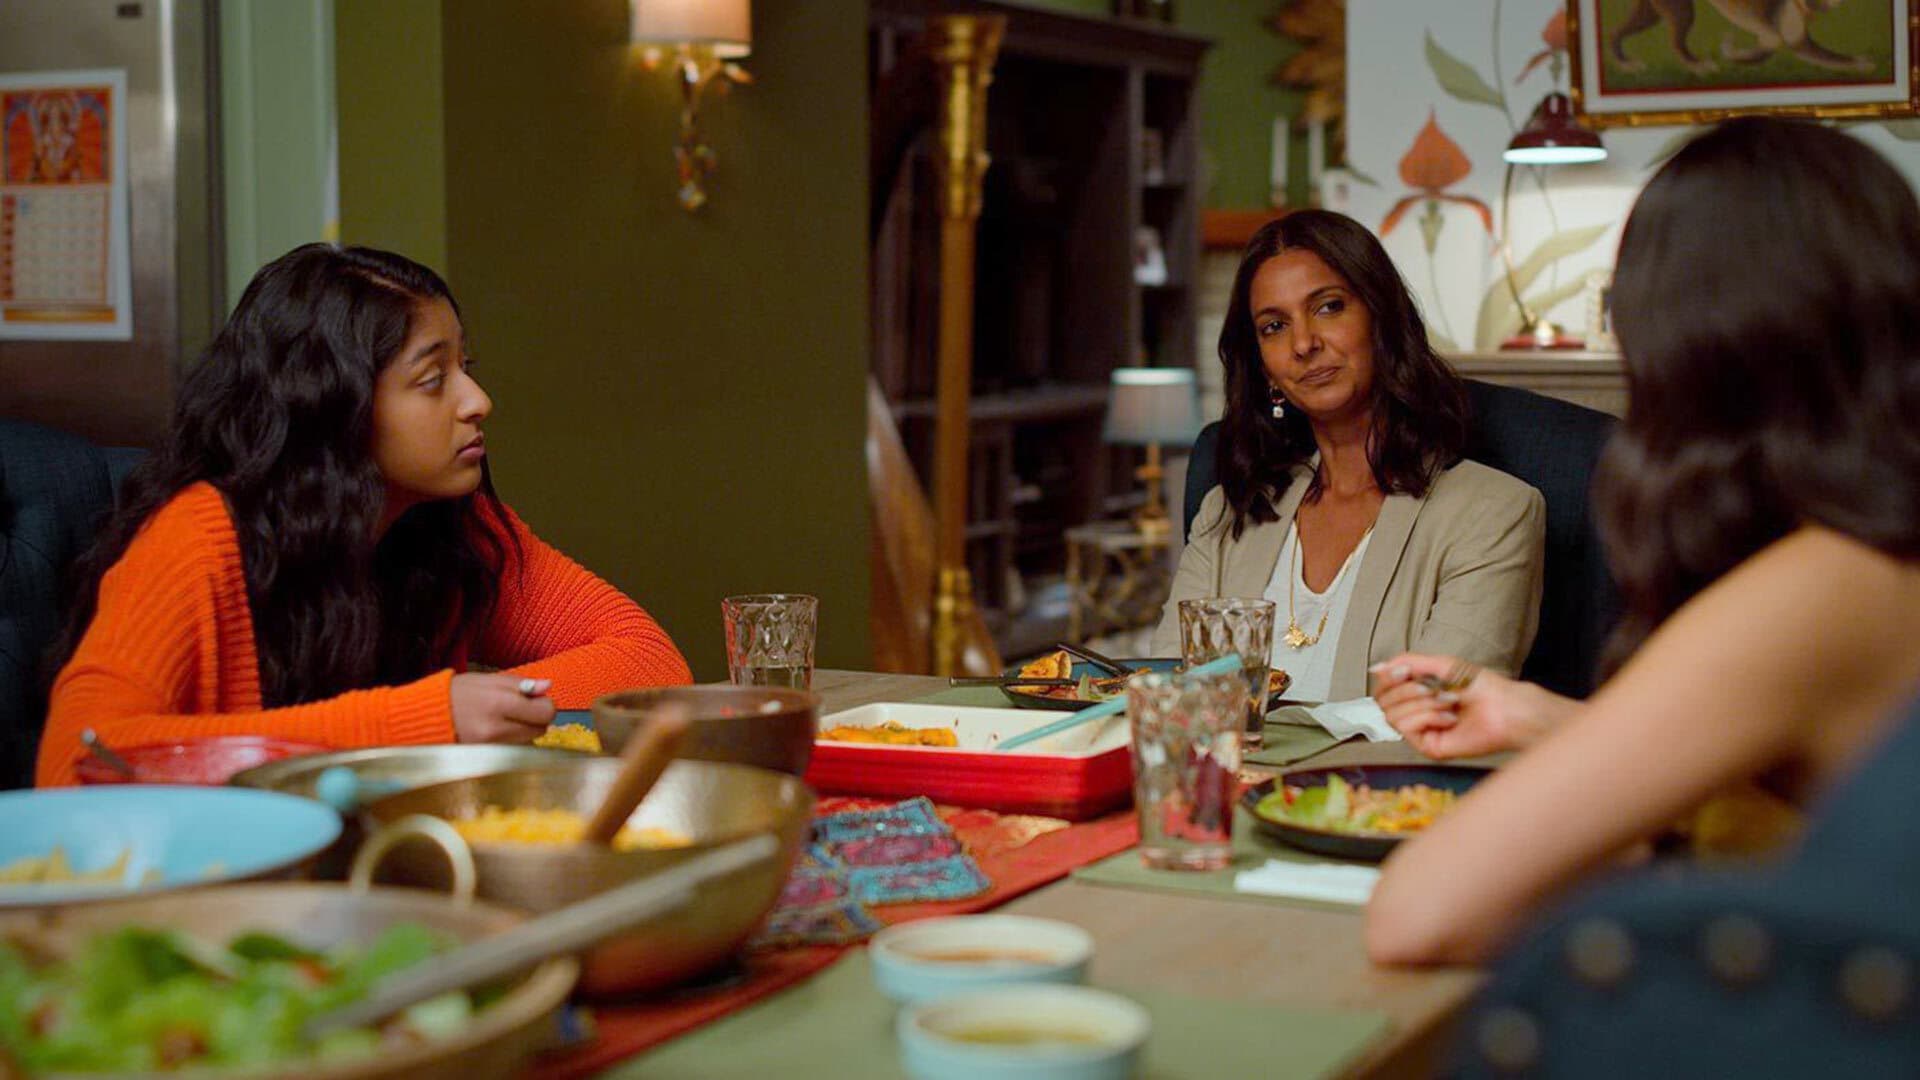 Screengrab of Poorna Jagannathan '96 sitting at the dinner table on Netflix show "Never Have I Ever"